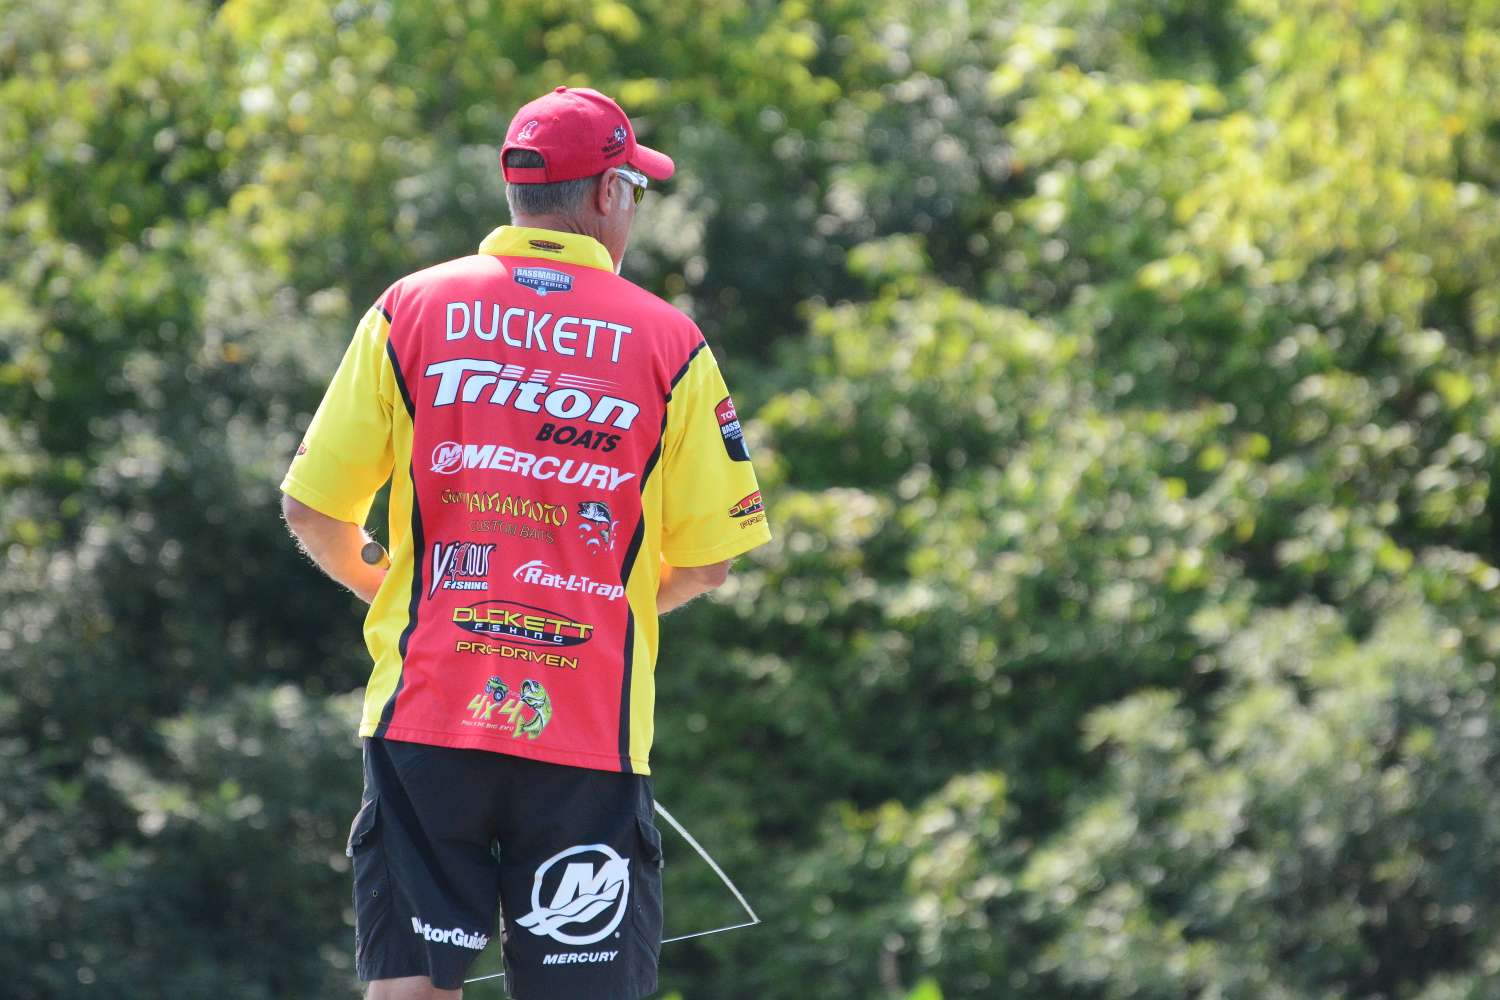 Duckett is encouraged that fish are nipping at his lure. Theyâre not big and theyâre not getting hooked, but at least it shows some movement underneath the water.